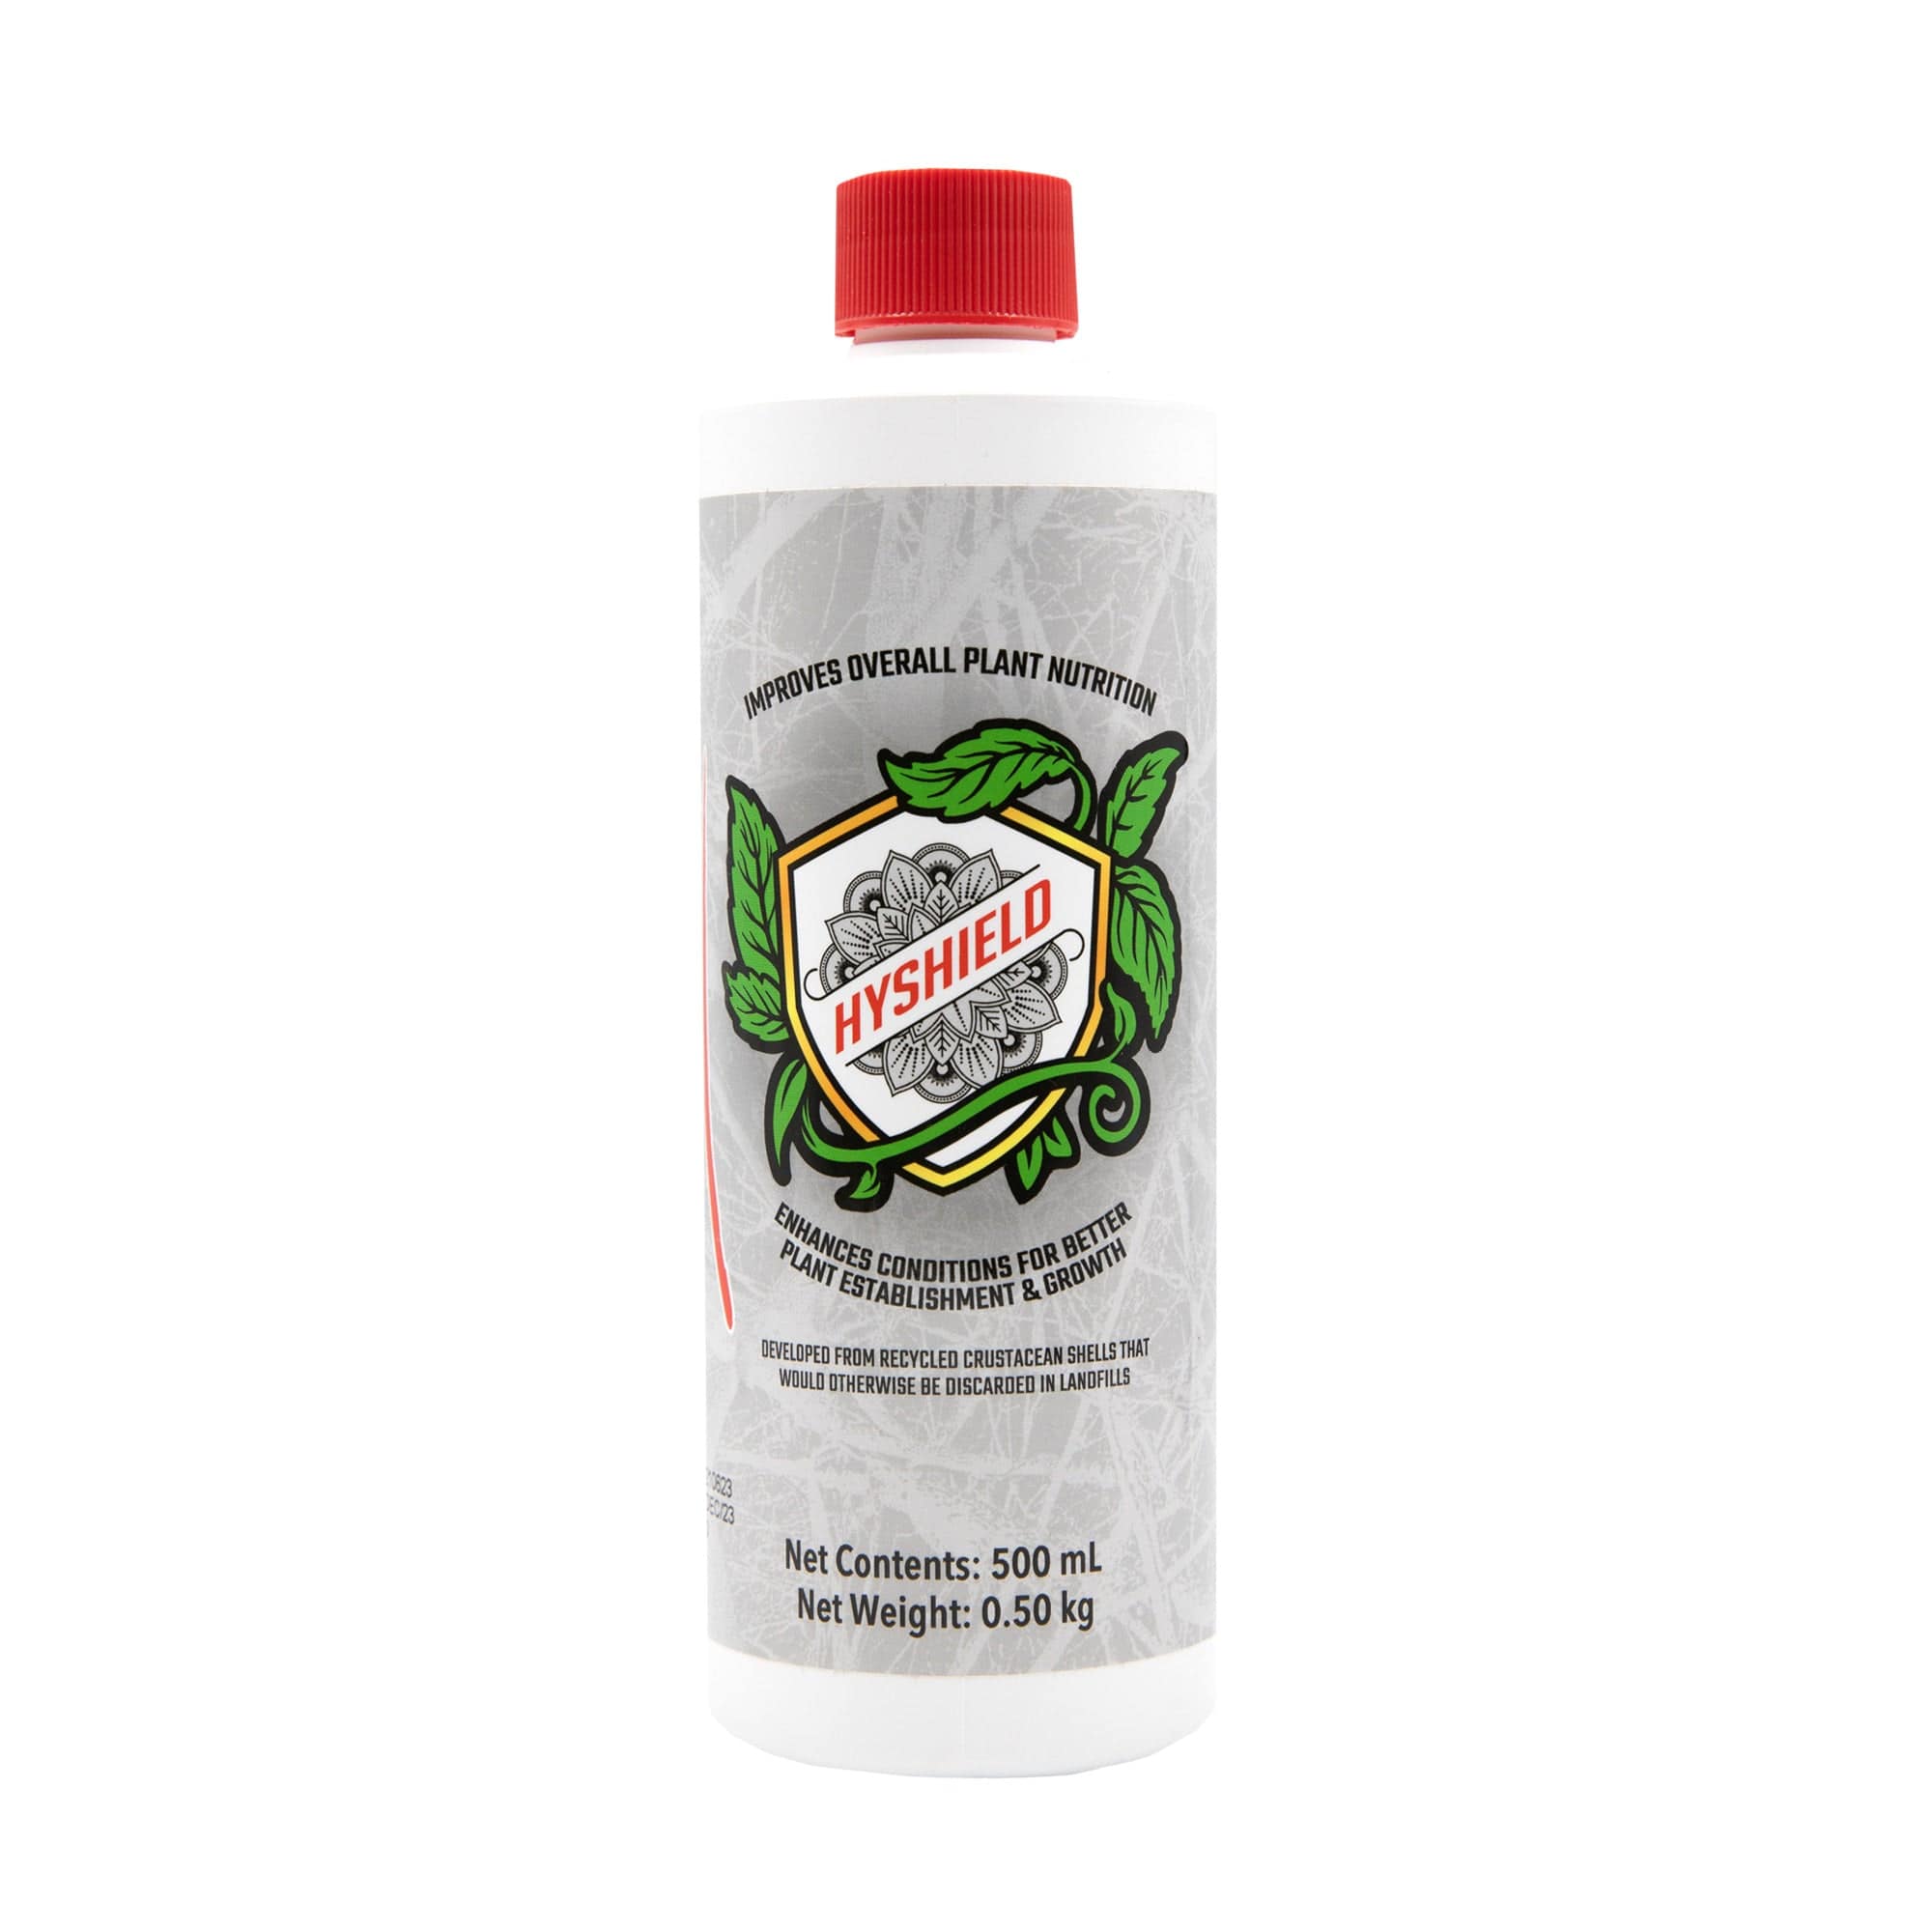 Dr Greenthumbs Hyshield 500ml